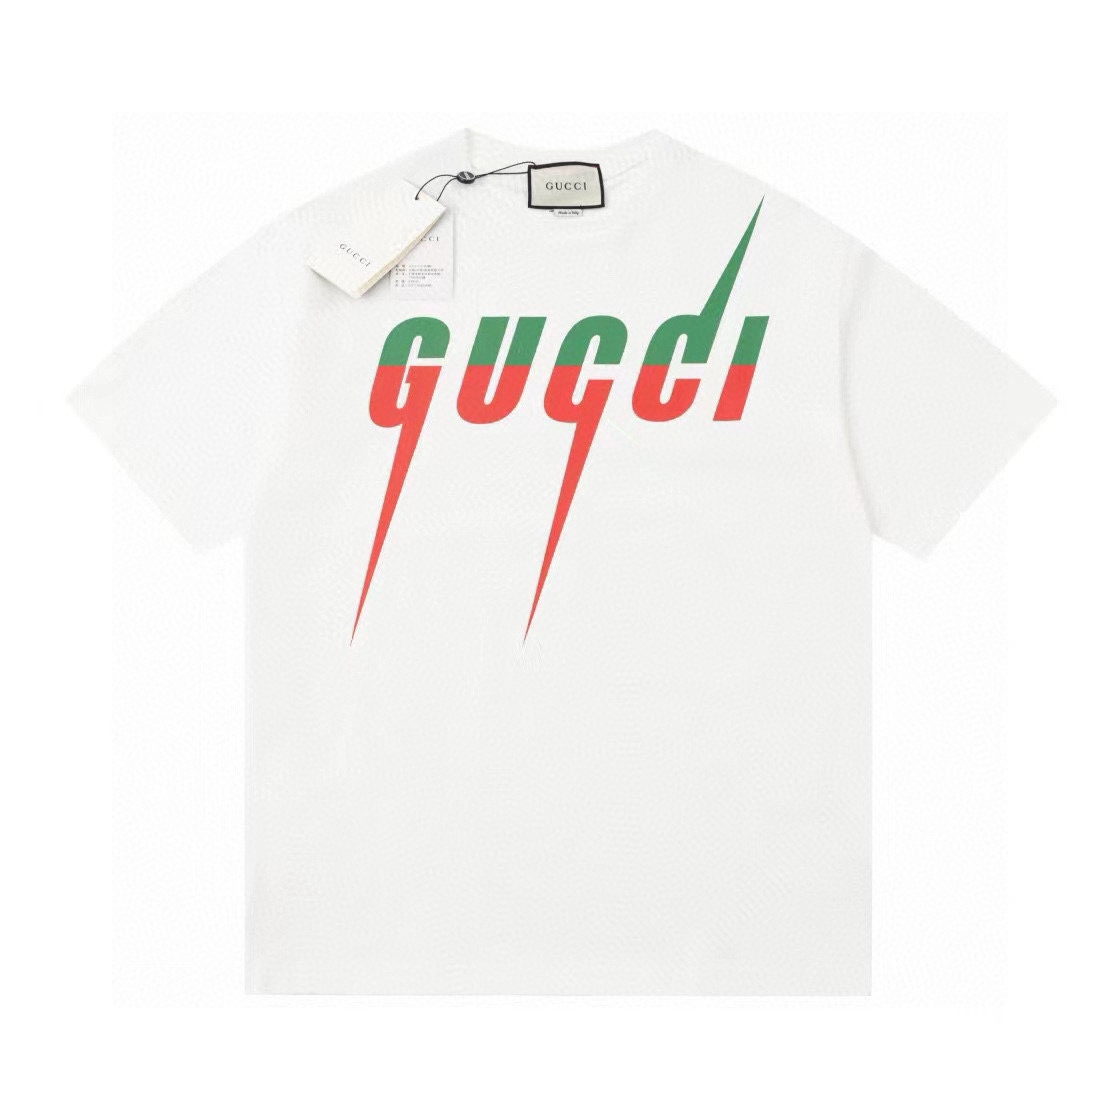 Gucci Clothing T-Shirt Black White Printing Unisex Cotton Spring/Summer Collection Short Sleeve